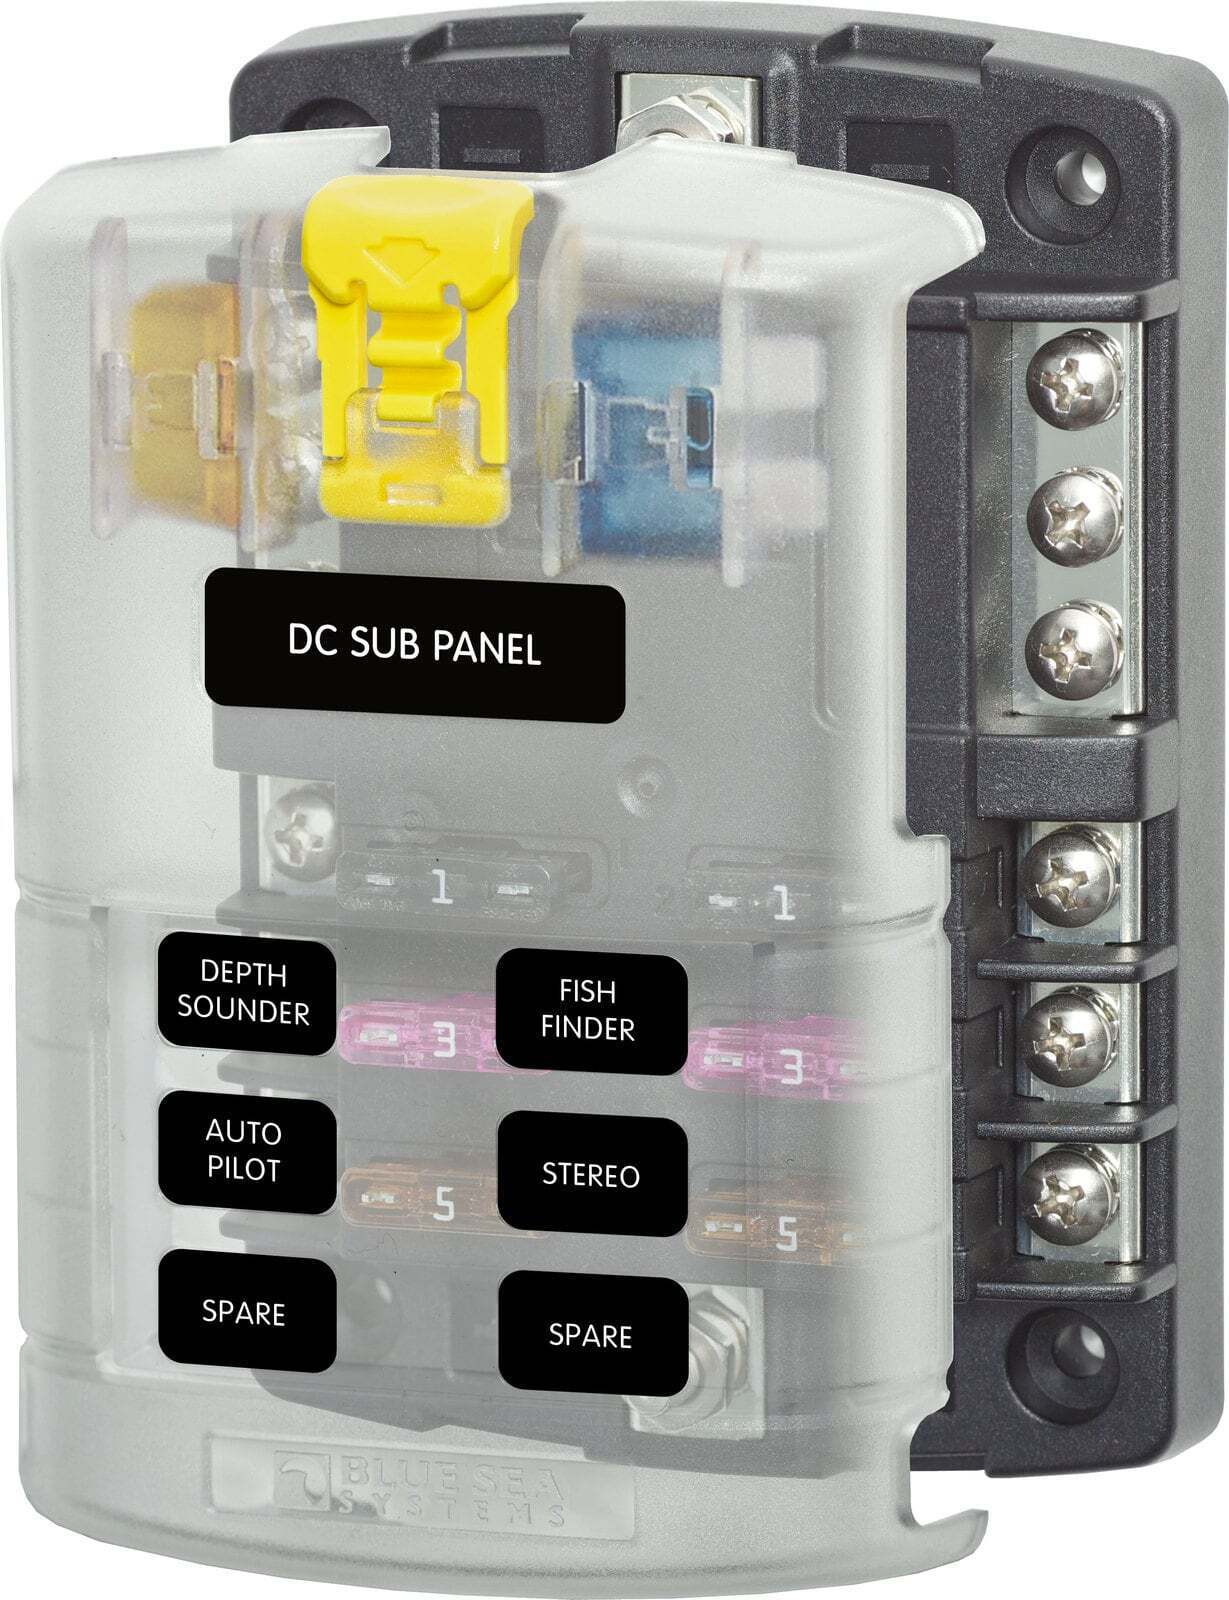 Blue Sea Blade Fuse Block/Holder – 6 Circuits with Negative Bus and Cover